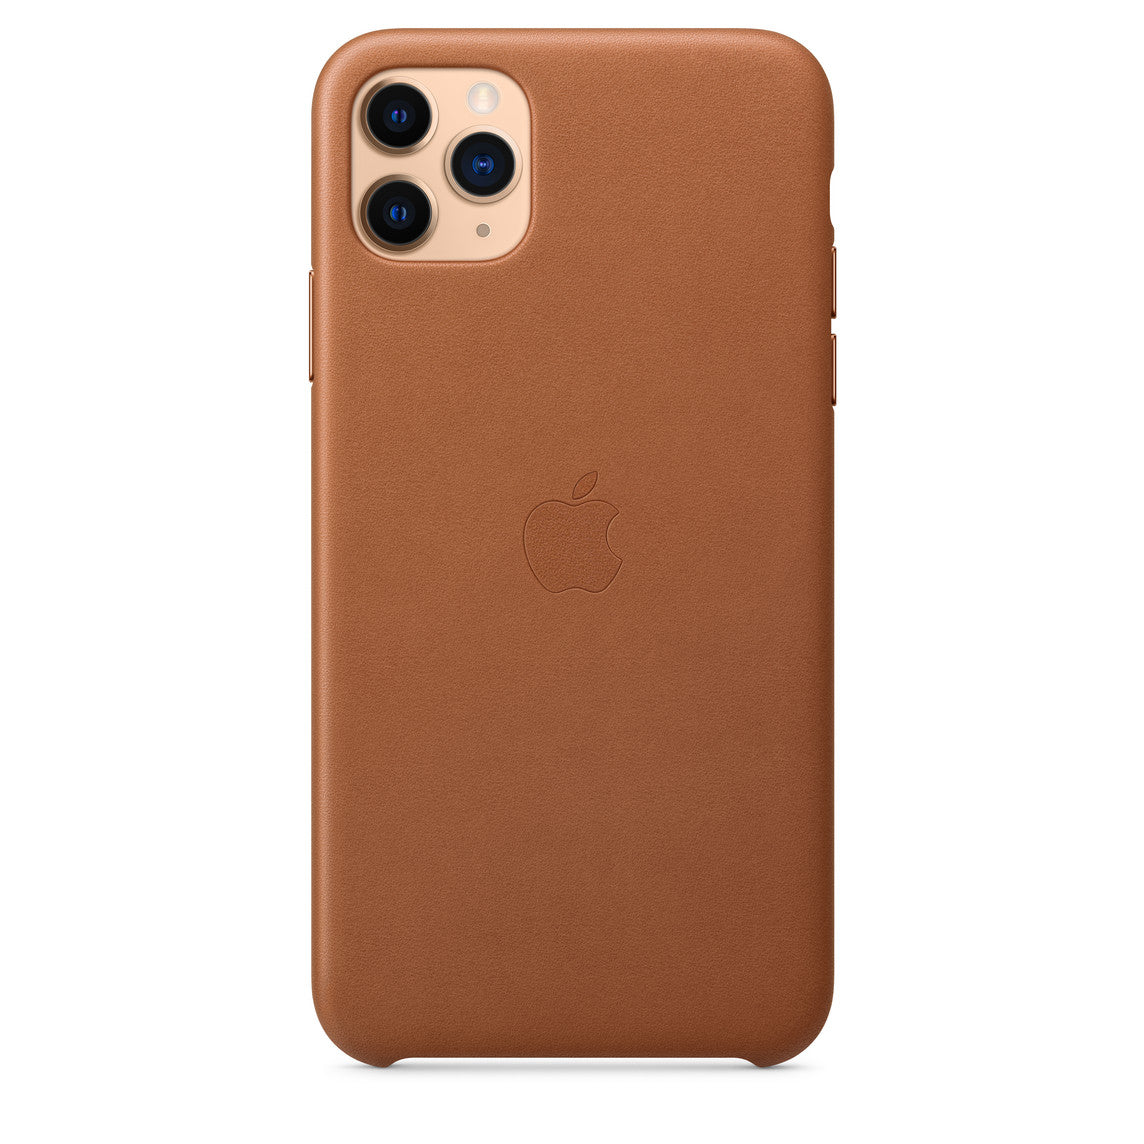 Apple iPhone 11 Pro Max Leather Case - Brown Brown New - Sealed